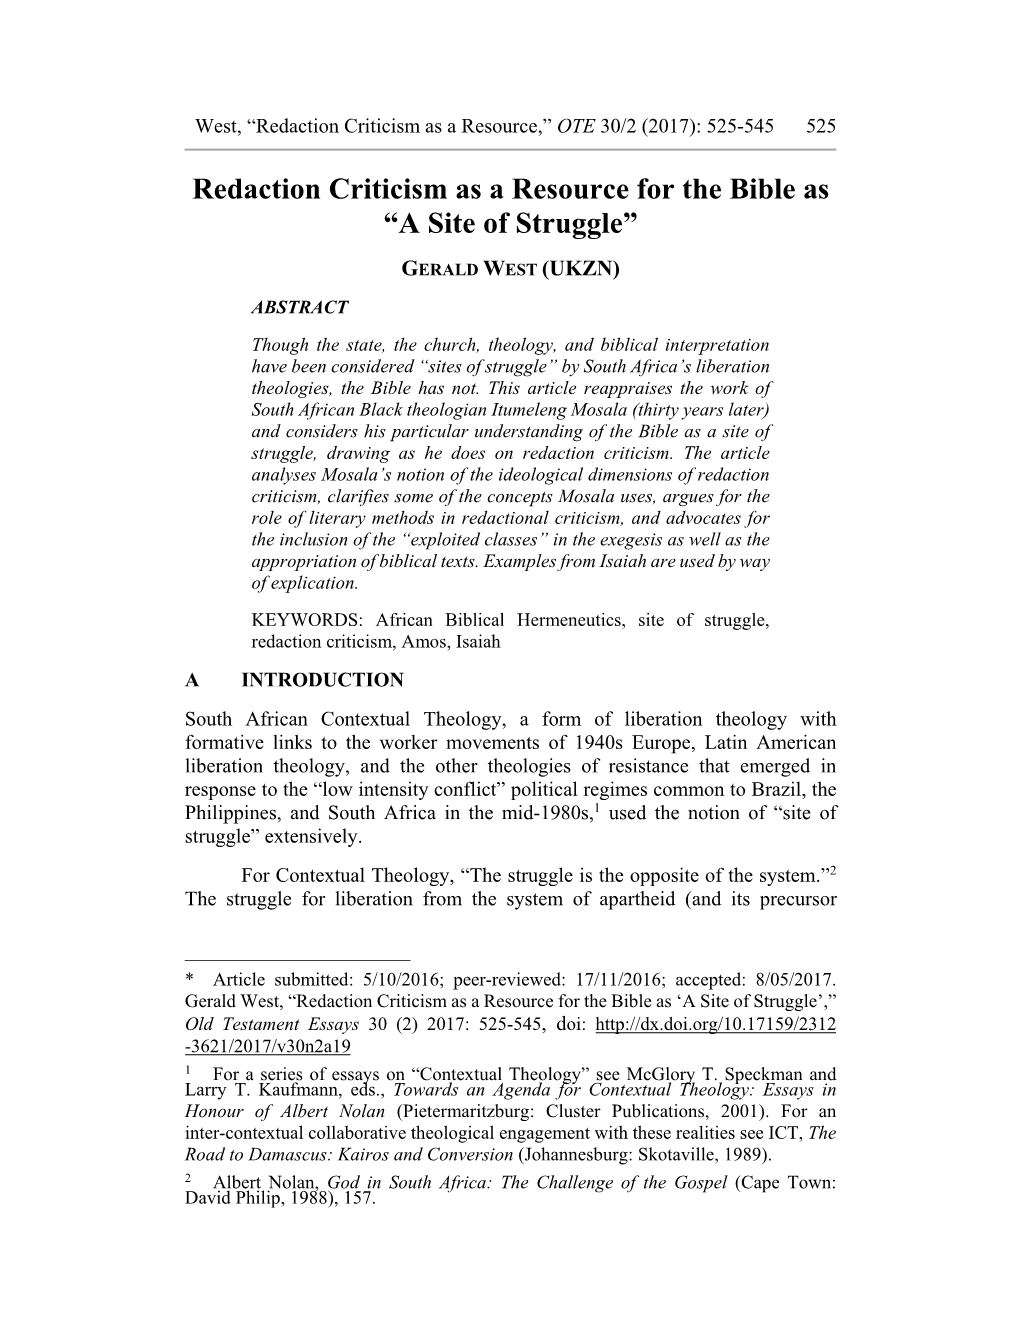 Redaction Criticism As a Resource for the Bible As “A Site of Struggle”